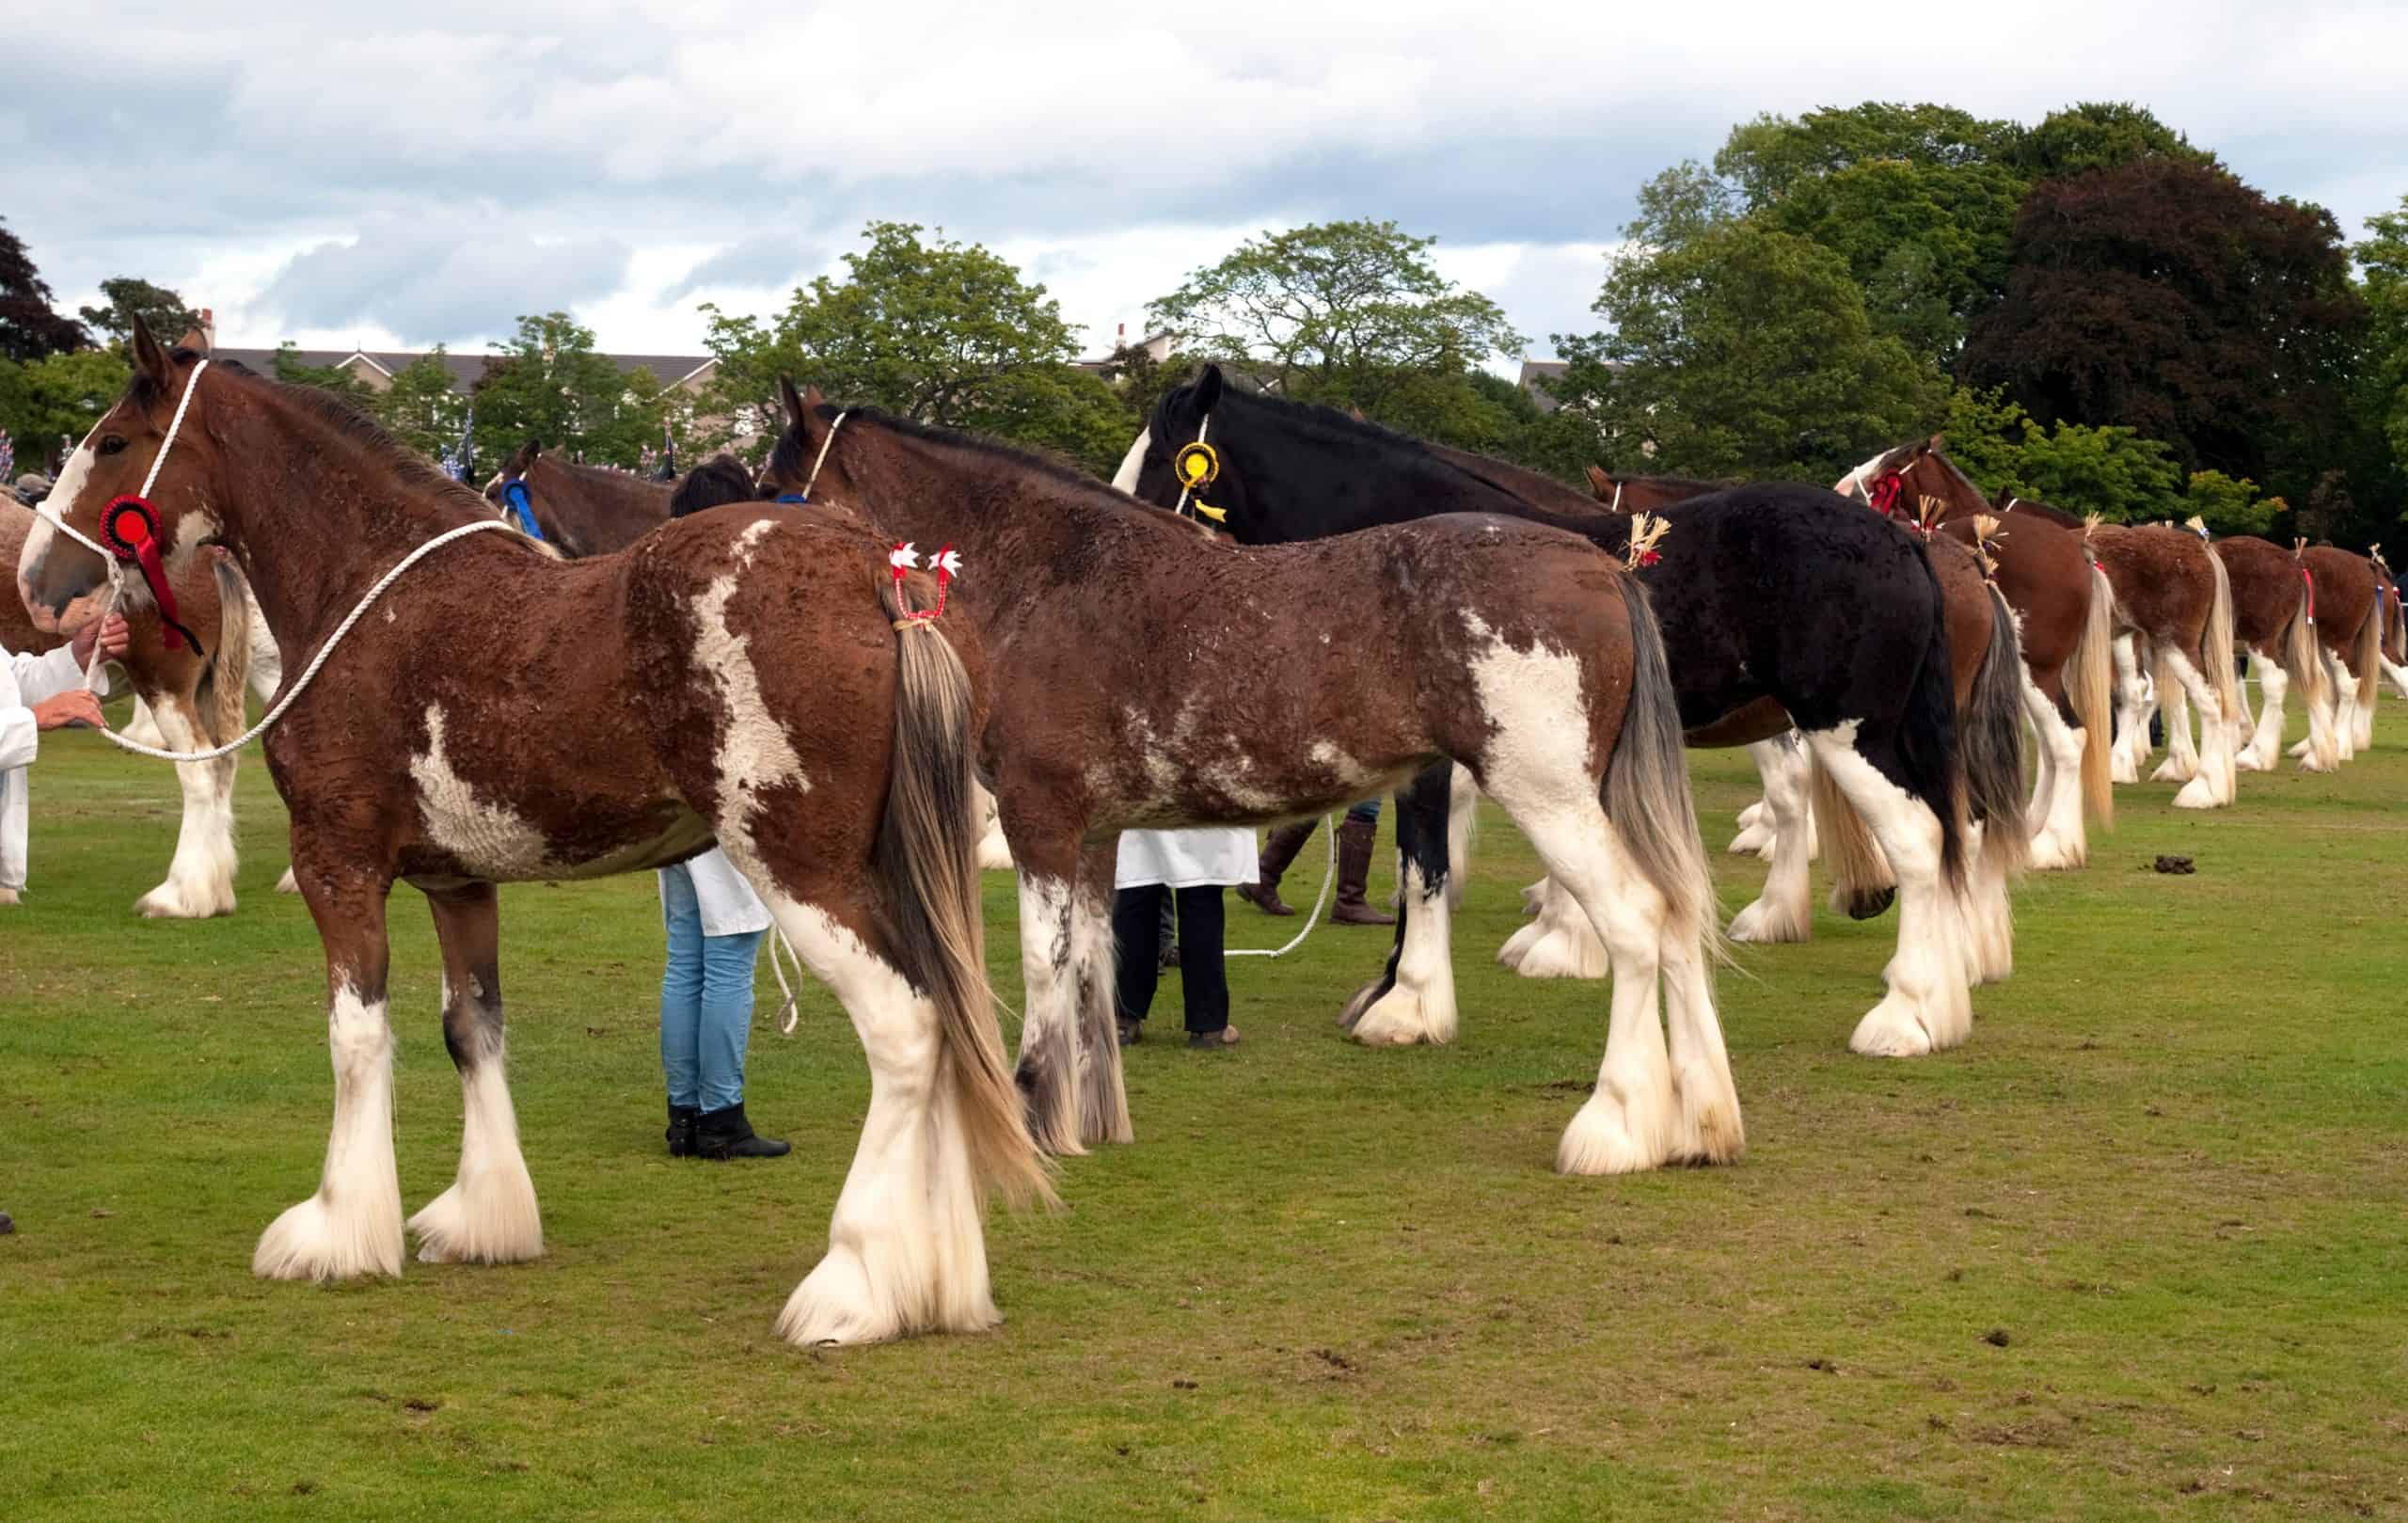 Line up of Clydesdale horses at an agricultural show